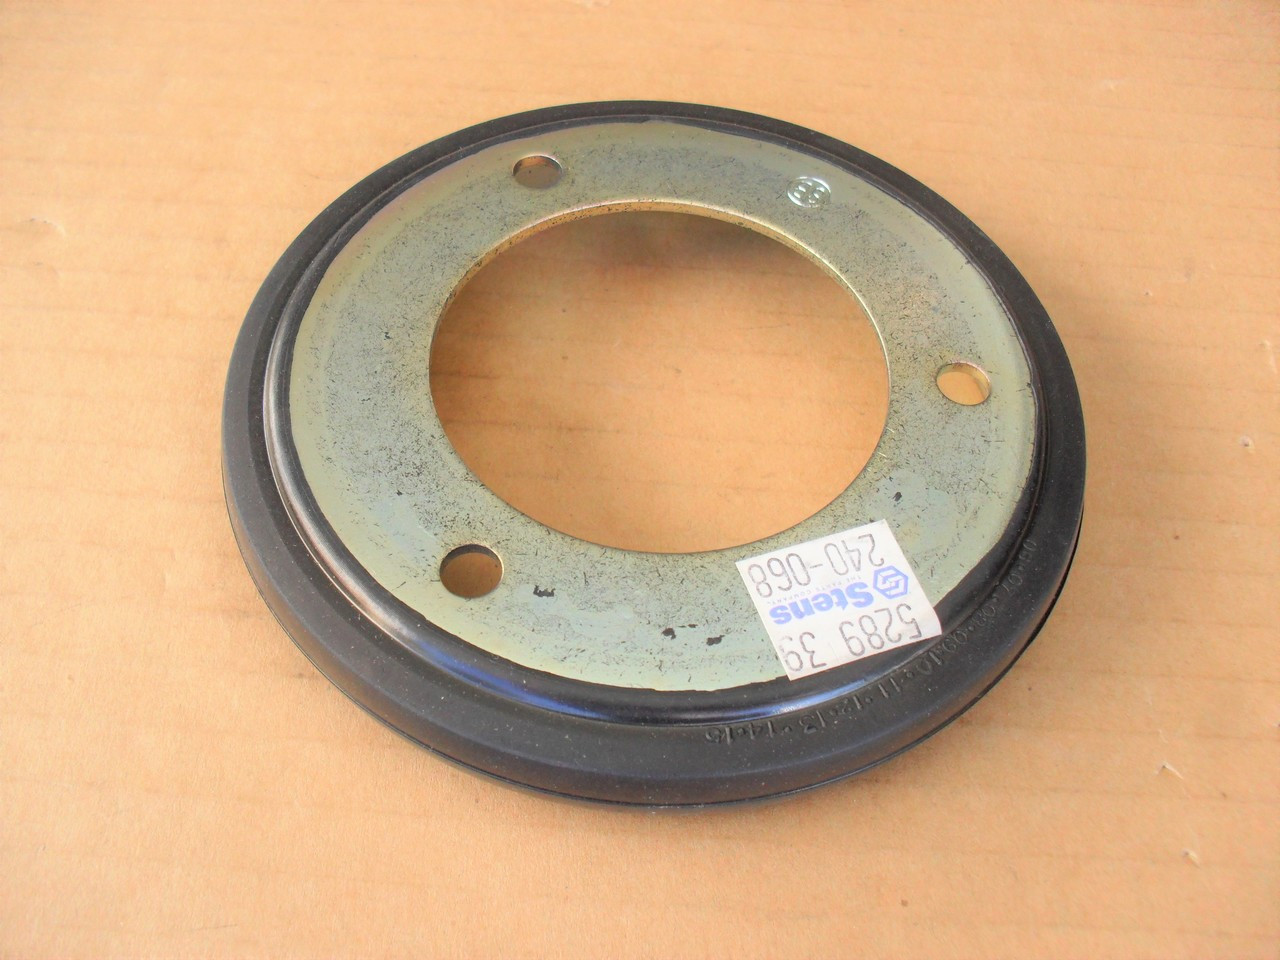 Drive Disc for Ariens 02201300 03240700 03248300 22013 2201300 922003 922006 to 922010 922012 to 922022